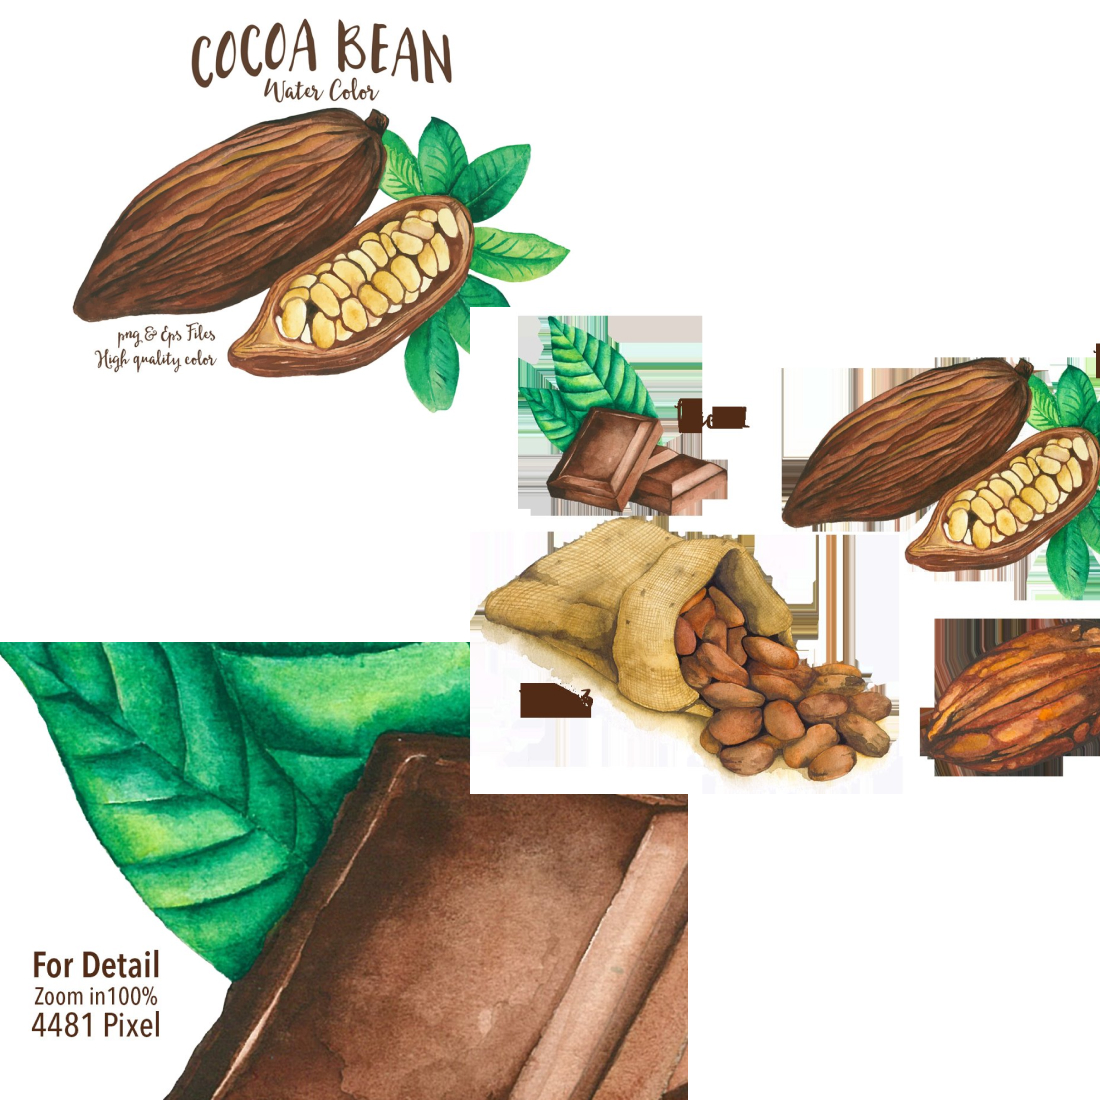 Print with cocoa beans.